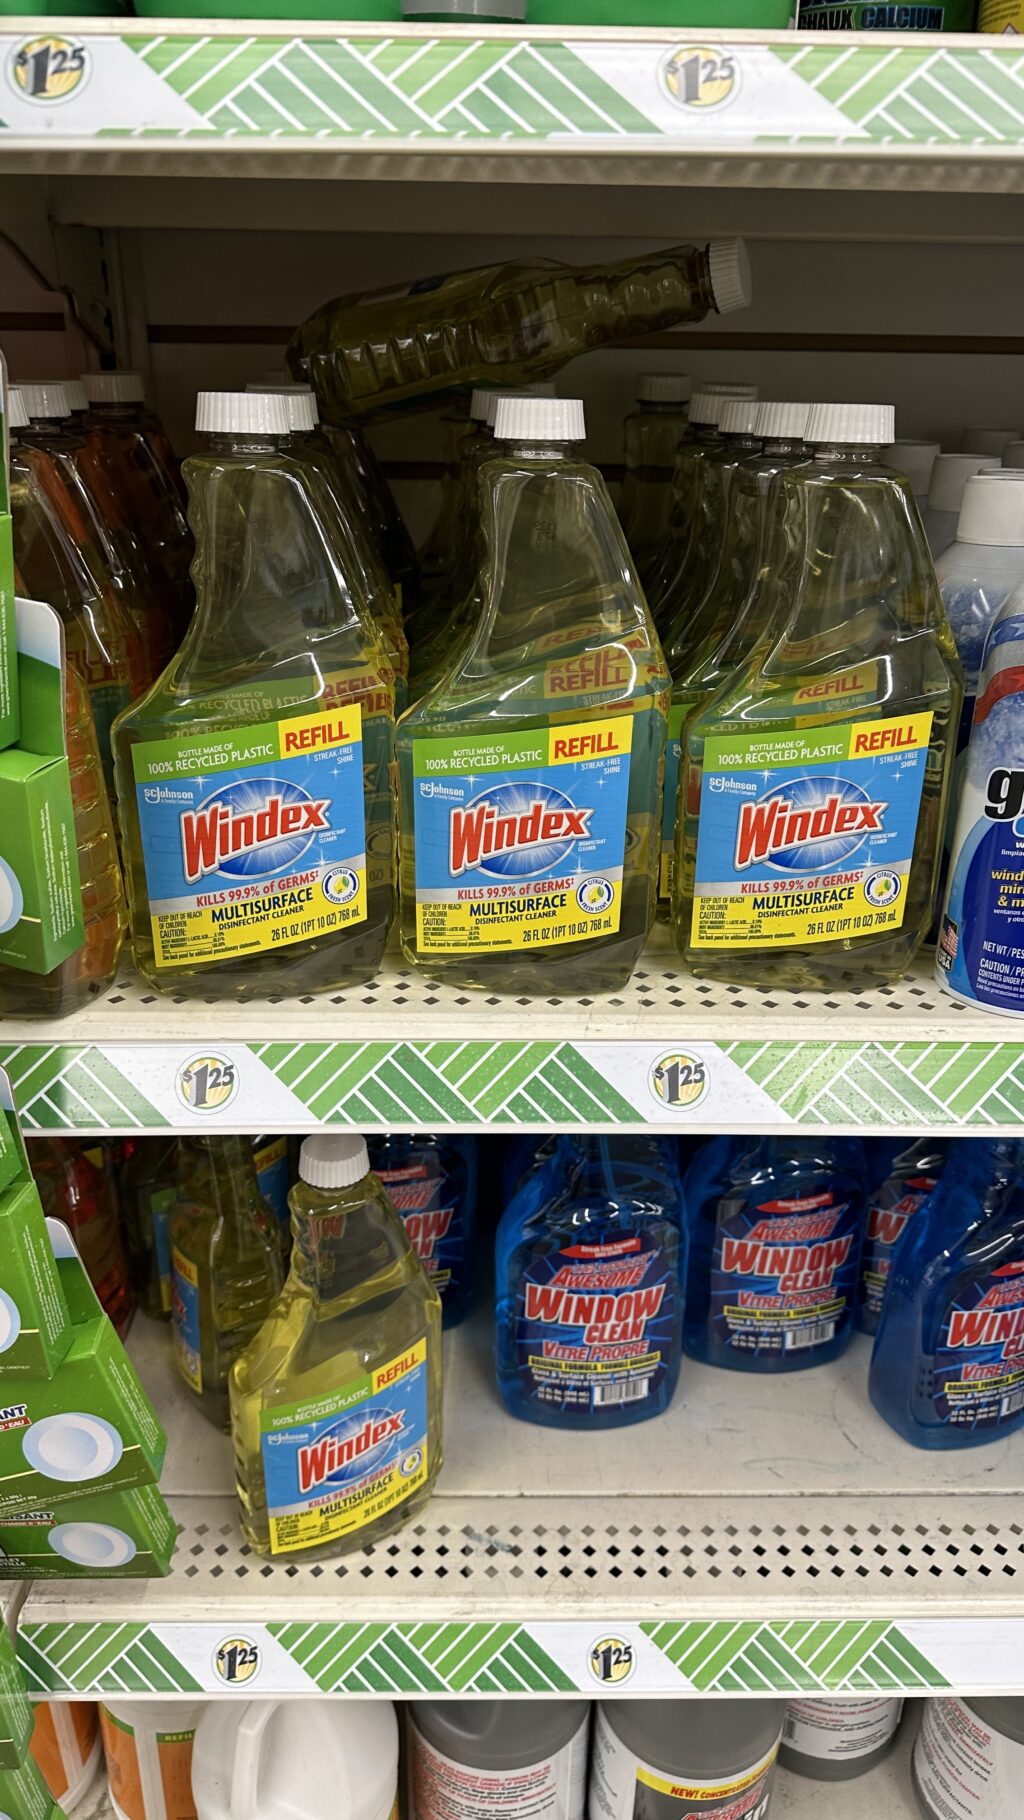 Windex Multi-Surface Disinfectant Cleaner at dollar tree